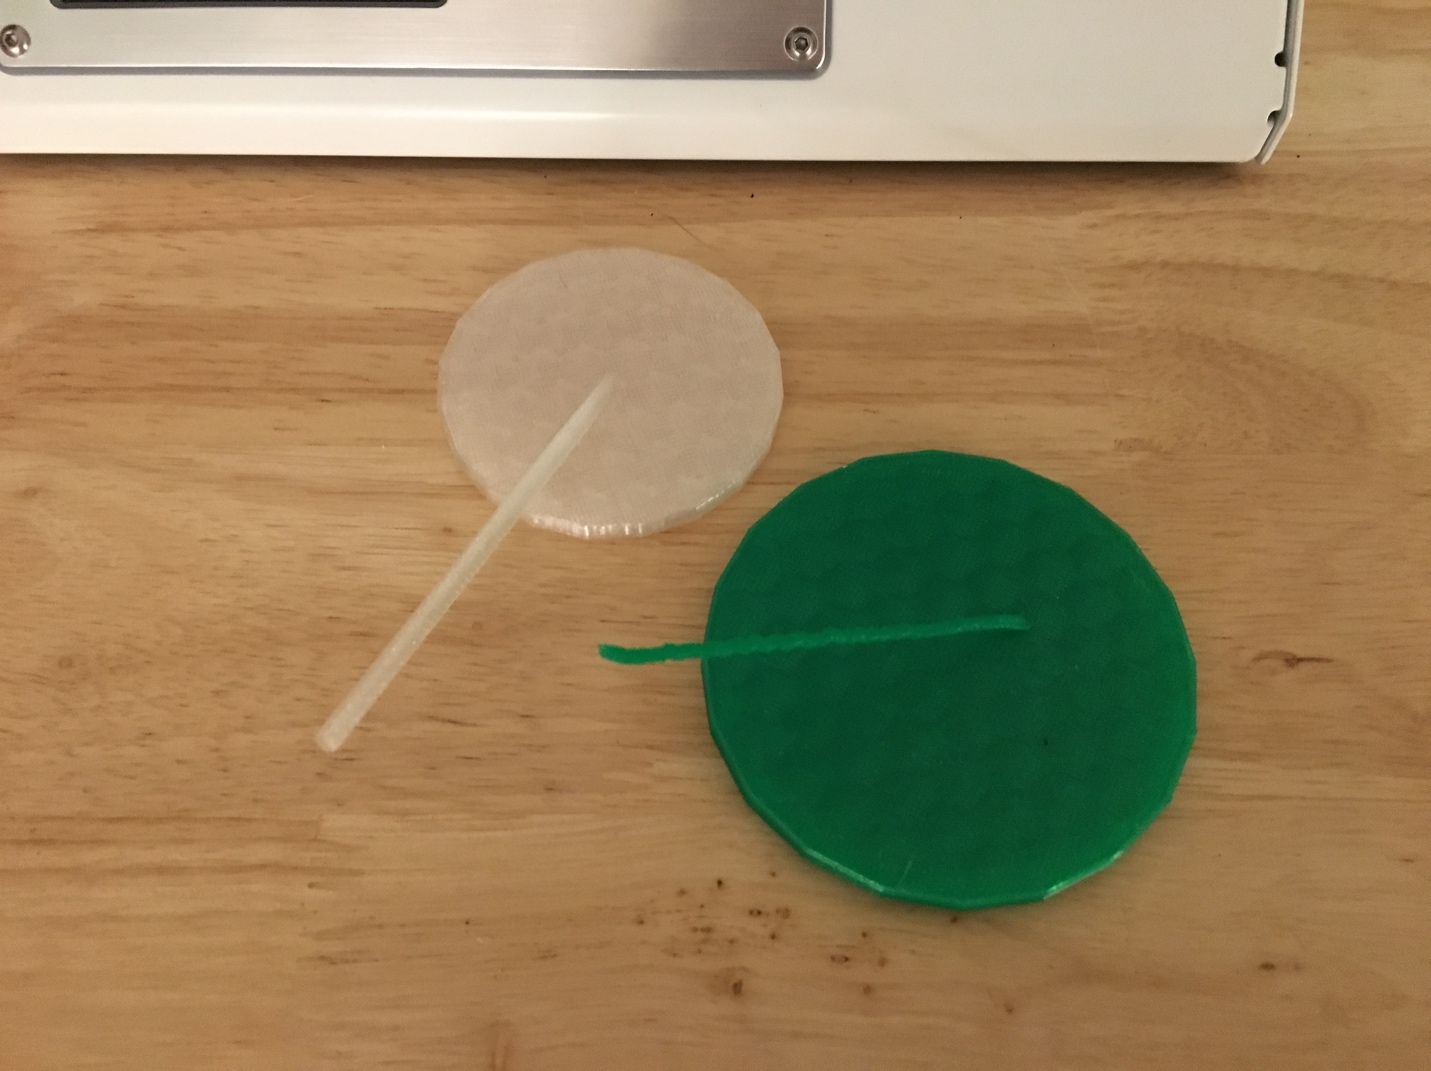 Atropos. 3D printed “sundials” generated from spin accelerometer data.